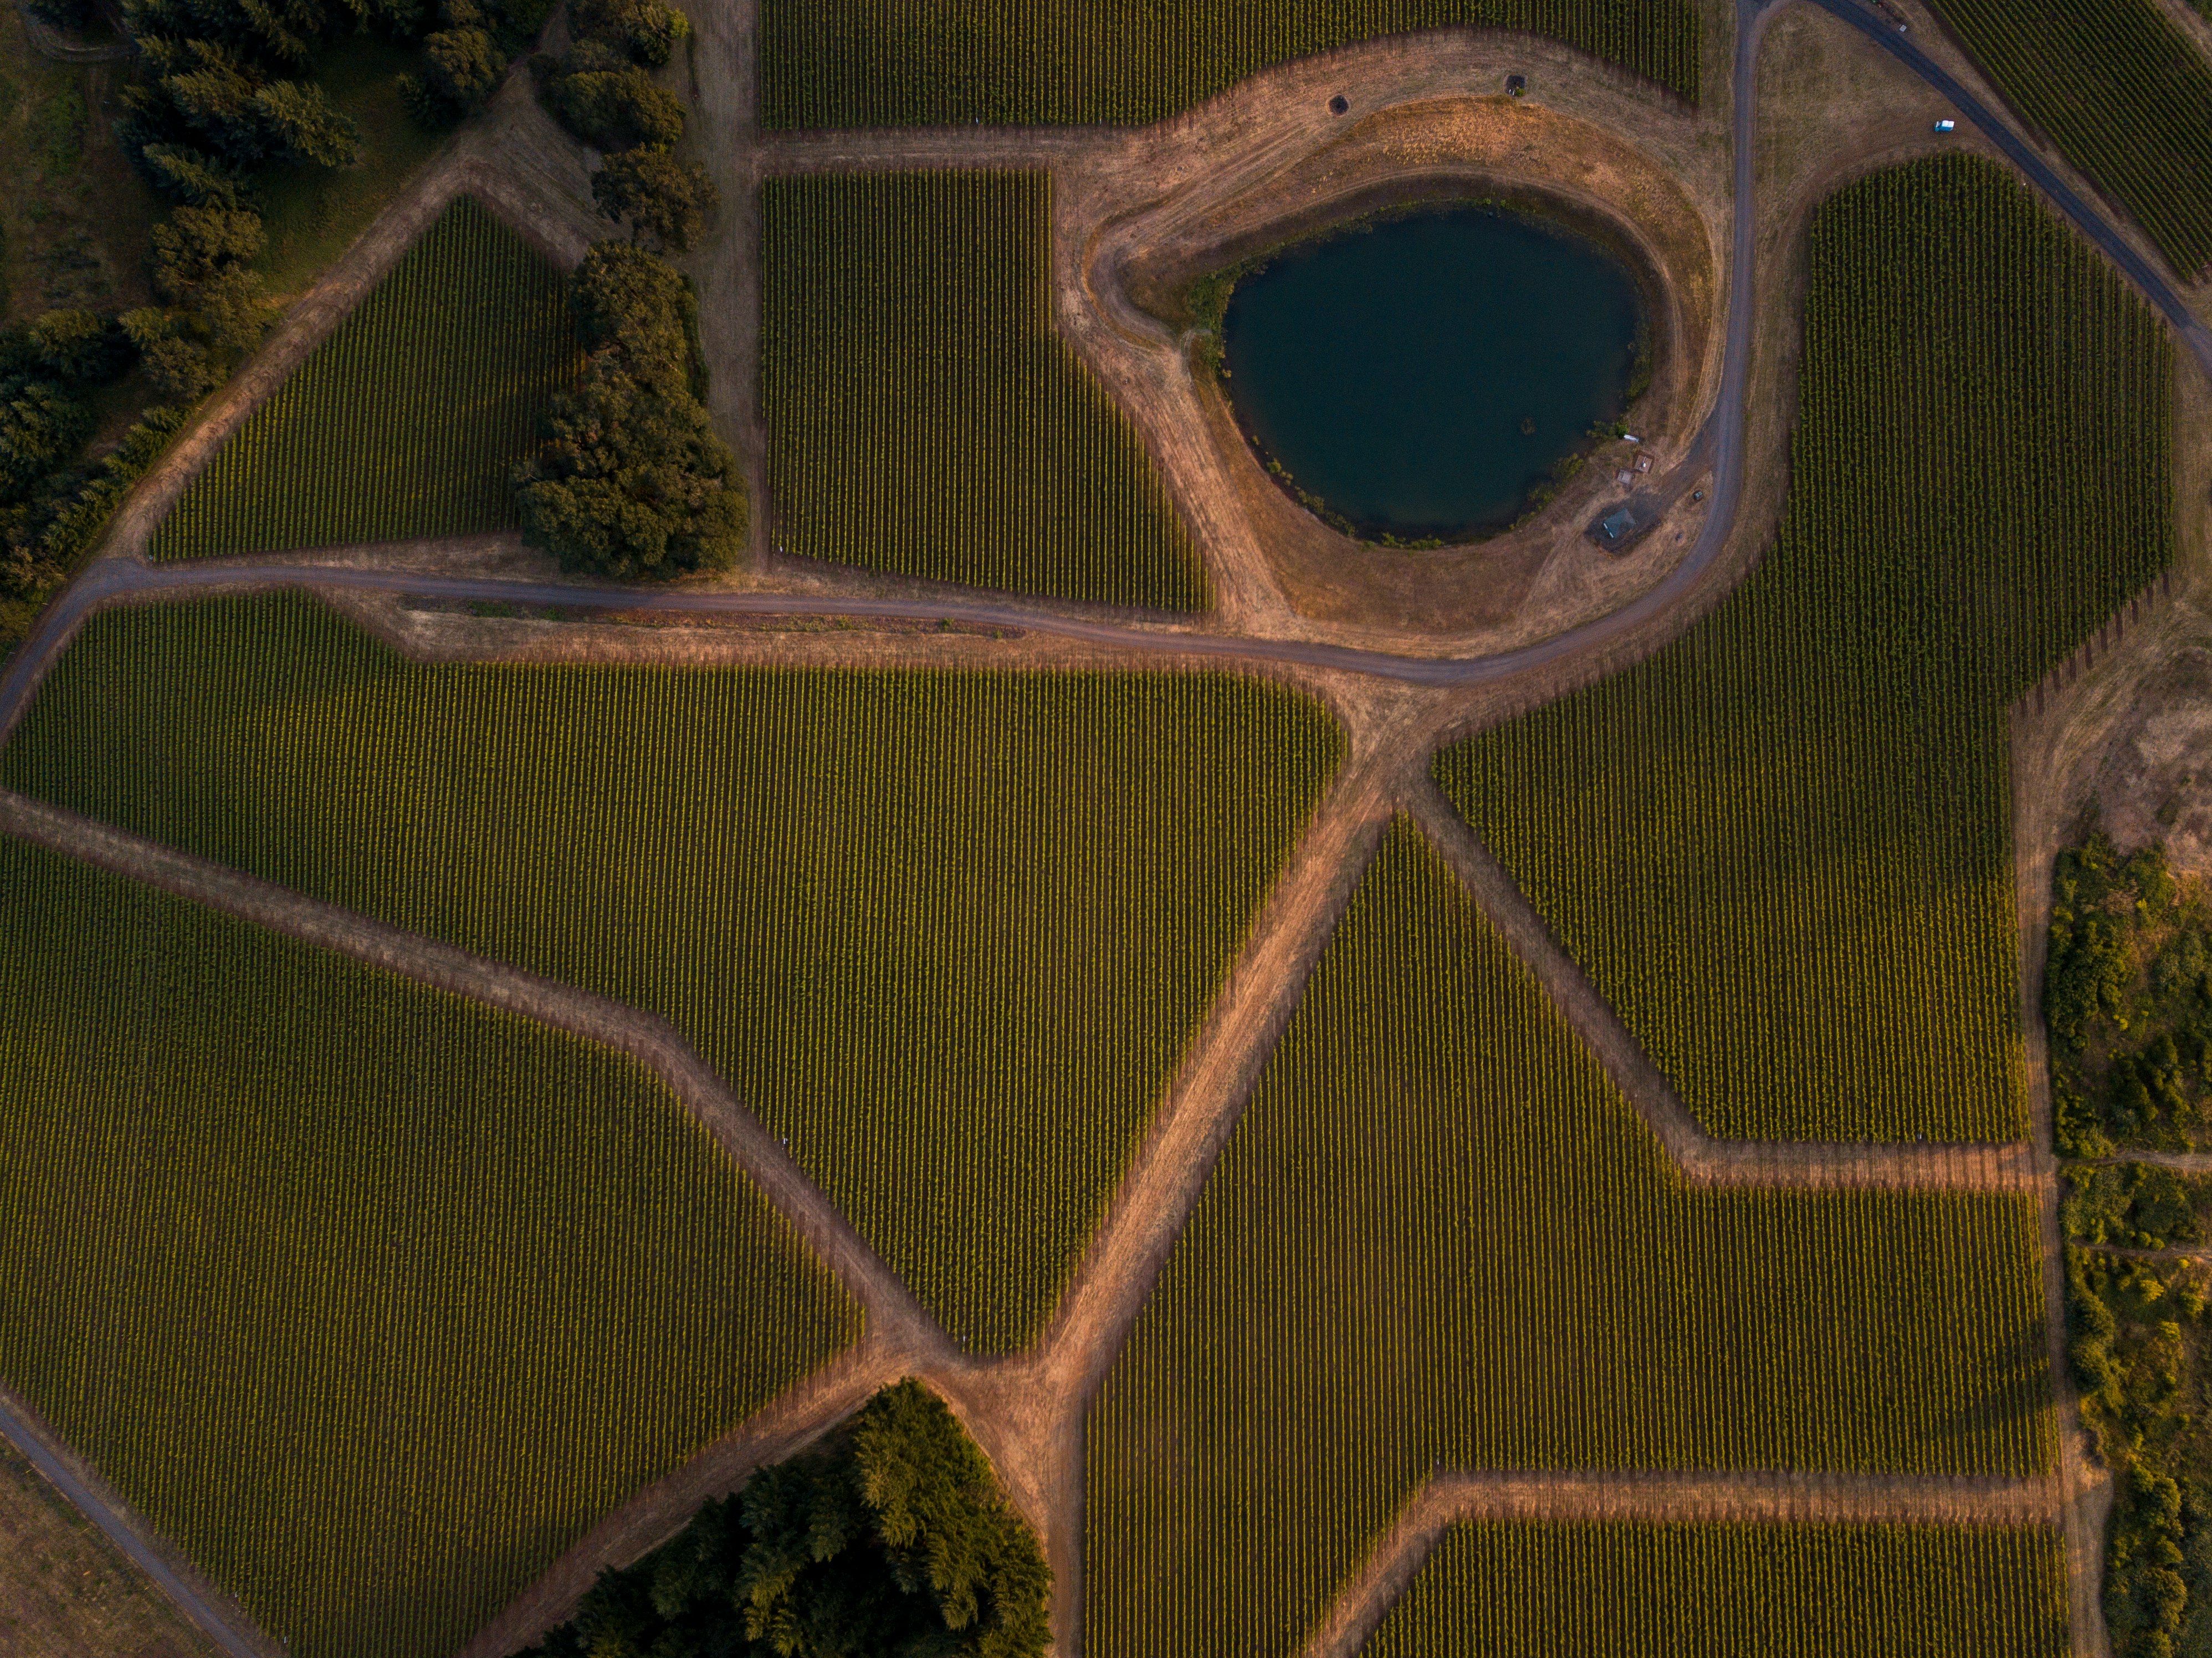  I was going for subtle yet obvious curves, colors and depth--I think I nailed it. Those vines and the red volcanic soil looked amazing as the sun was setting. I've been playing around with straight down bird's-eye photos like this one and using the natural shadows and lines to bring out the depth and terrain. I took this with my drone over a vineyard on the side of a large hill in Marion County, Oregon. I don't care what anyone says--I love this photo! 